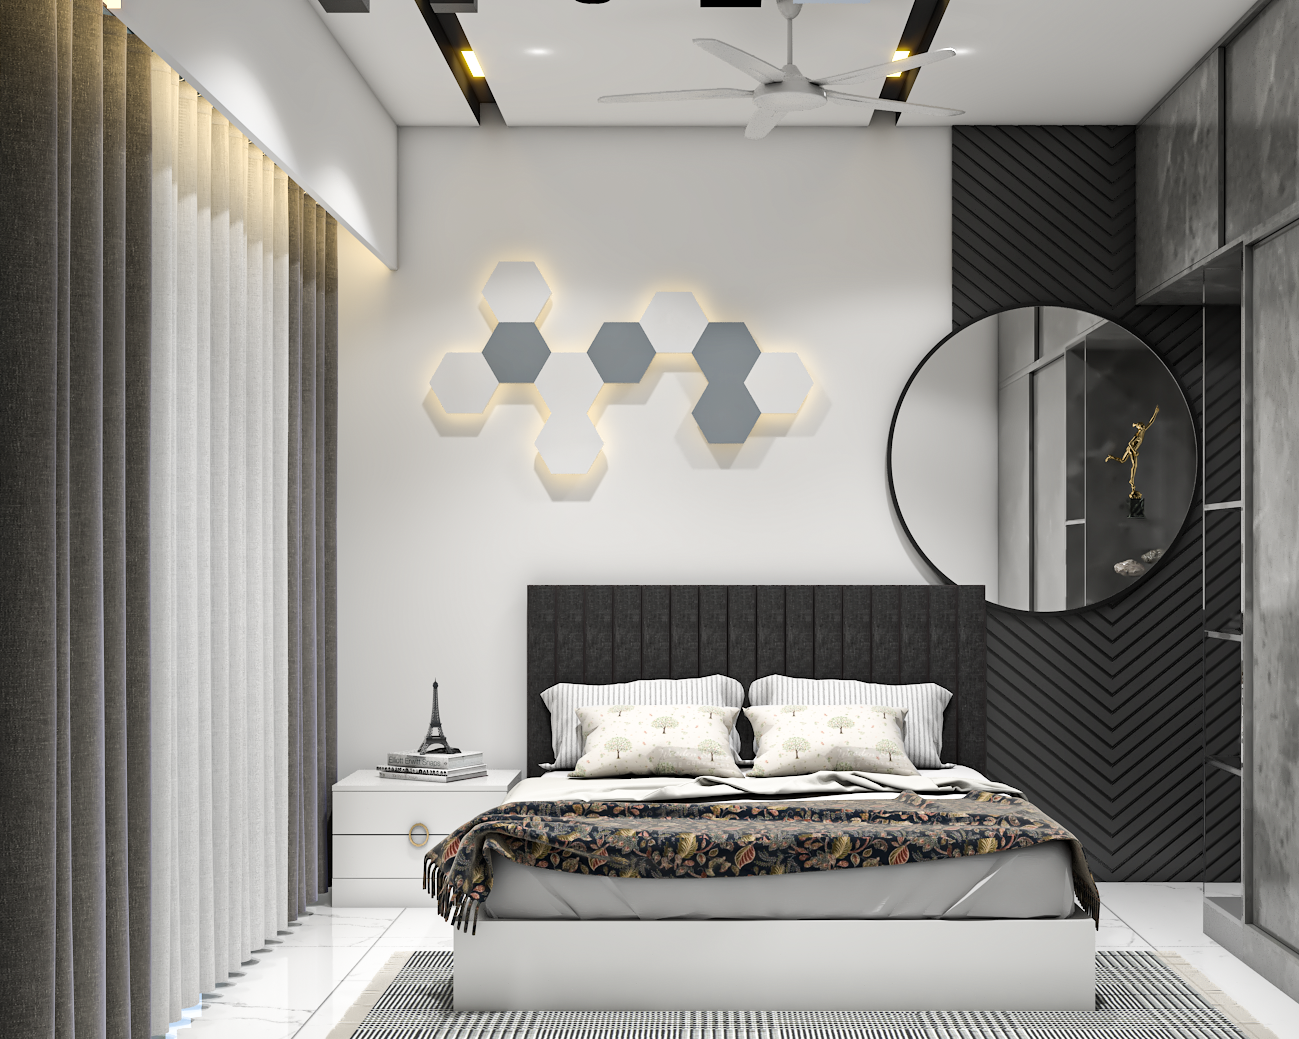 Contemporary Kid's Bedroom Design With Black And White Palette